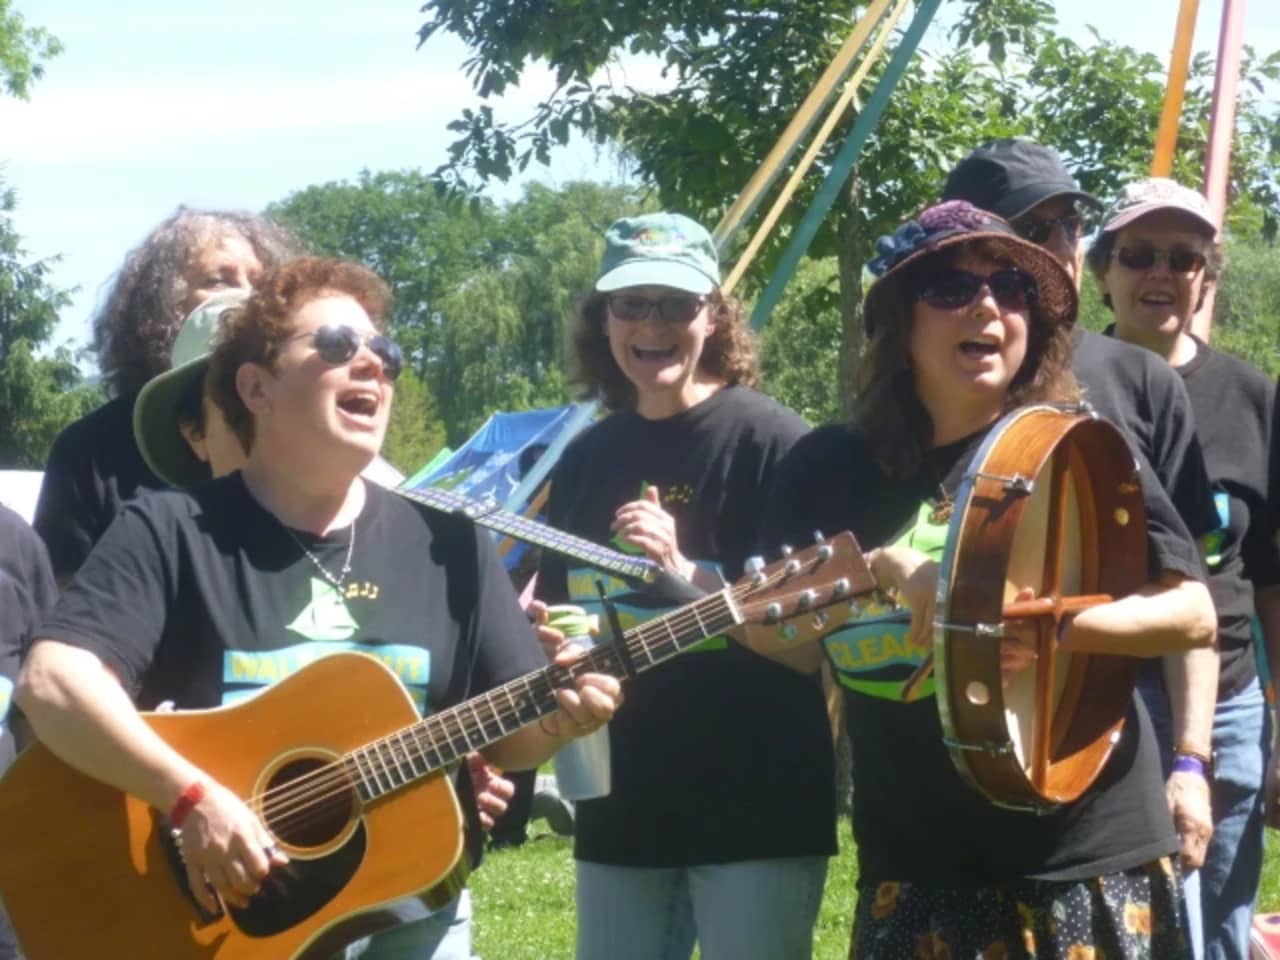 The Walkabout Clearwater Chorus performs at the Clearwater Festival. Clearwater announced the 2016 festival will not go forward.